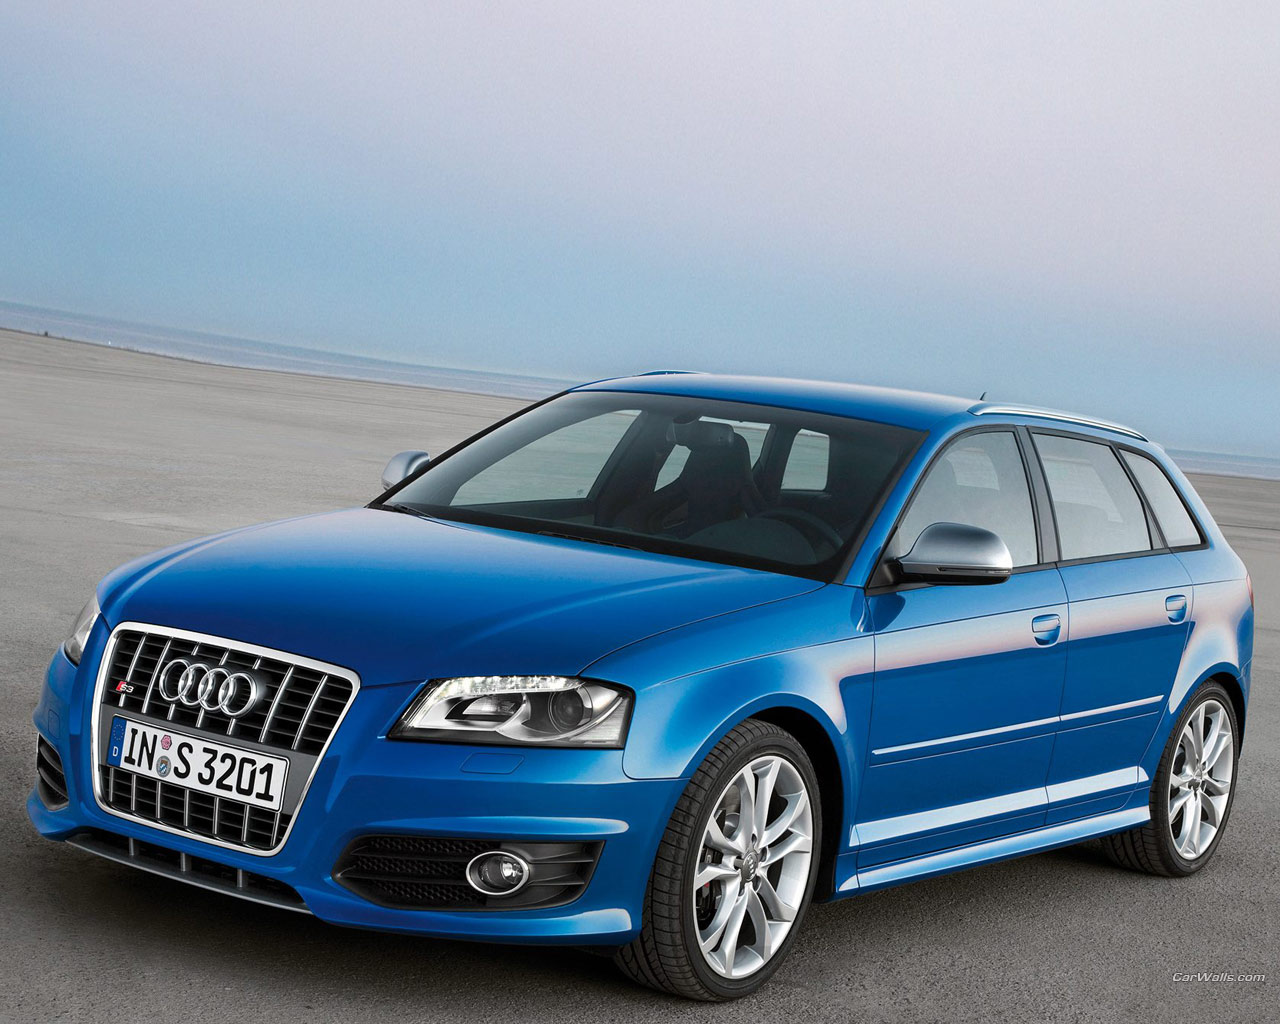 Download Audi A3 S3 Walpaper. The best sports Car ever. 2009 Audi A3 S3 Wallpaper High Resolution